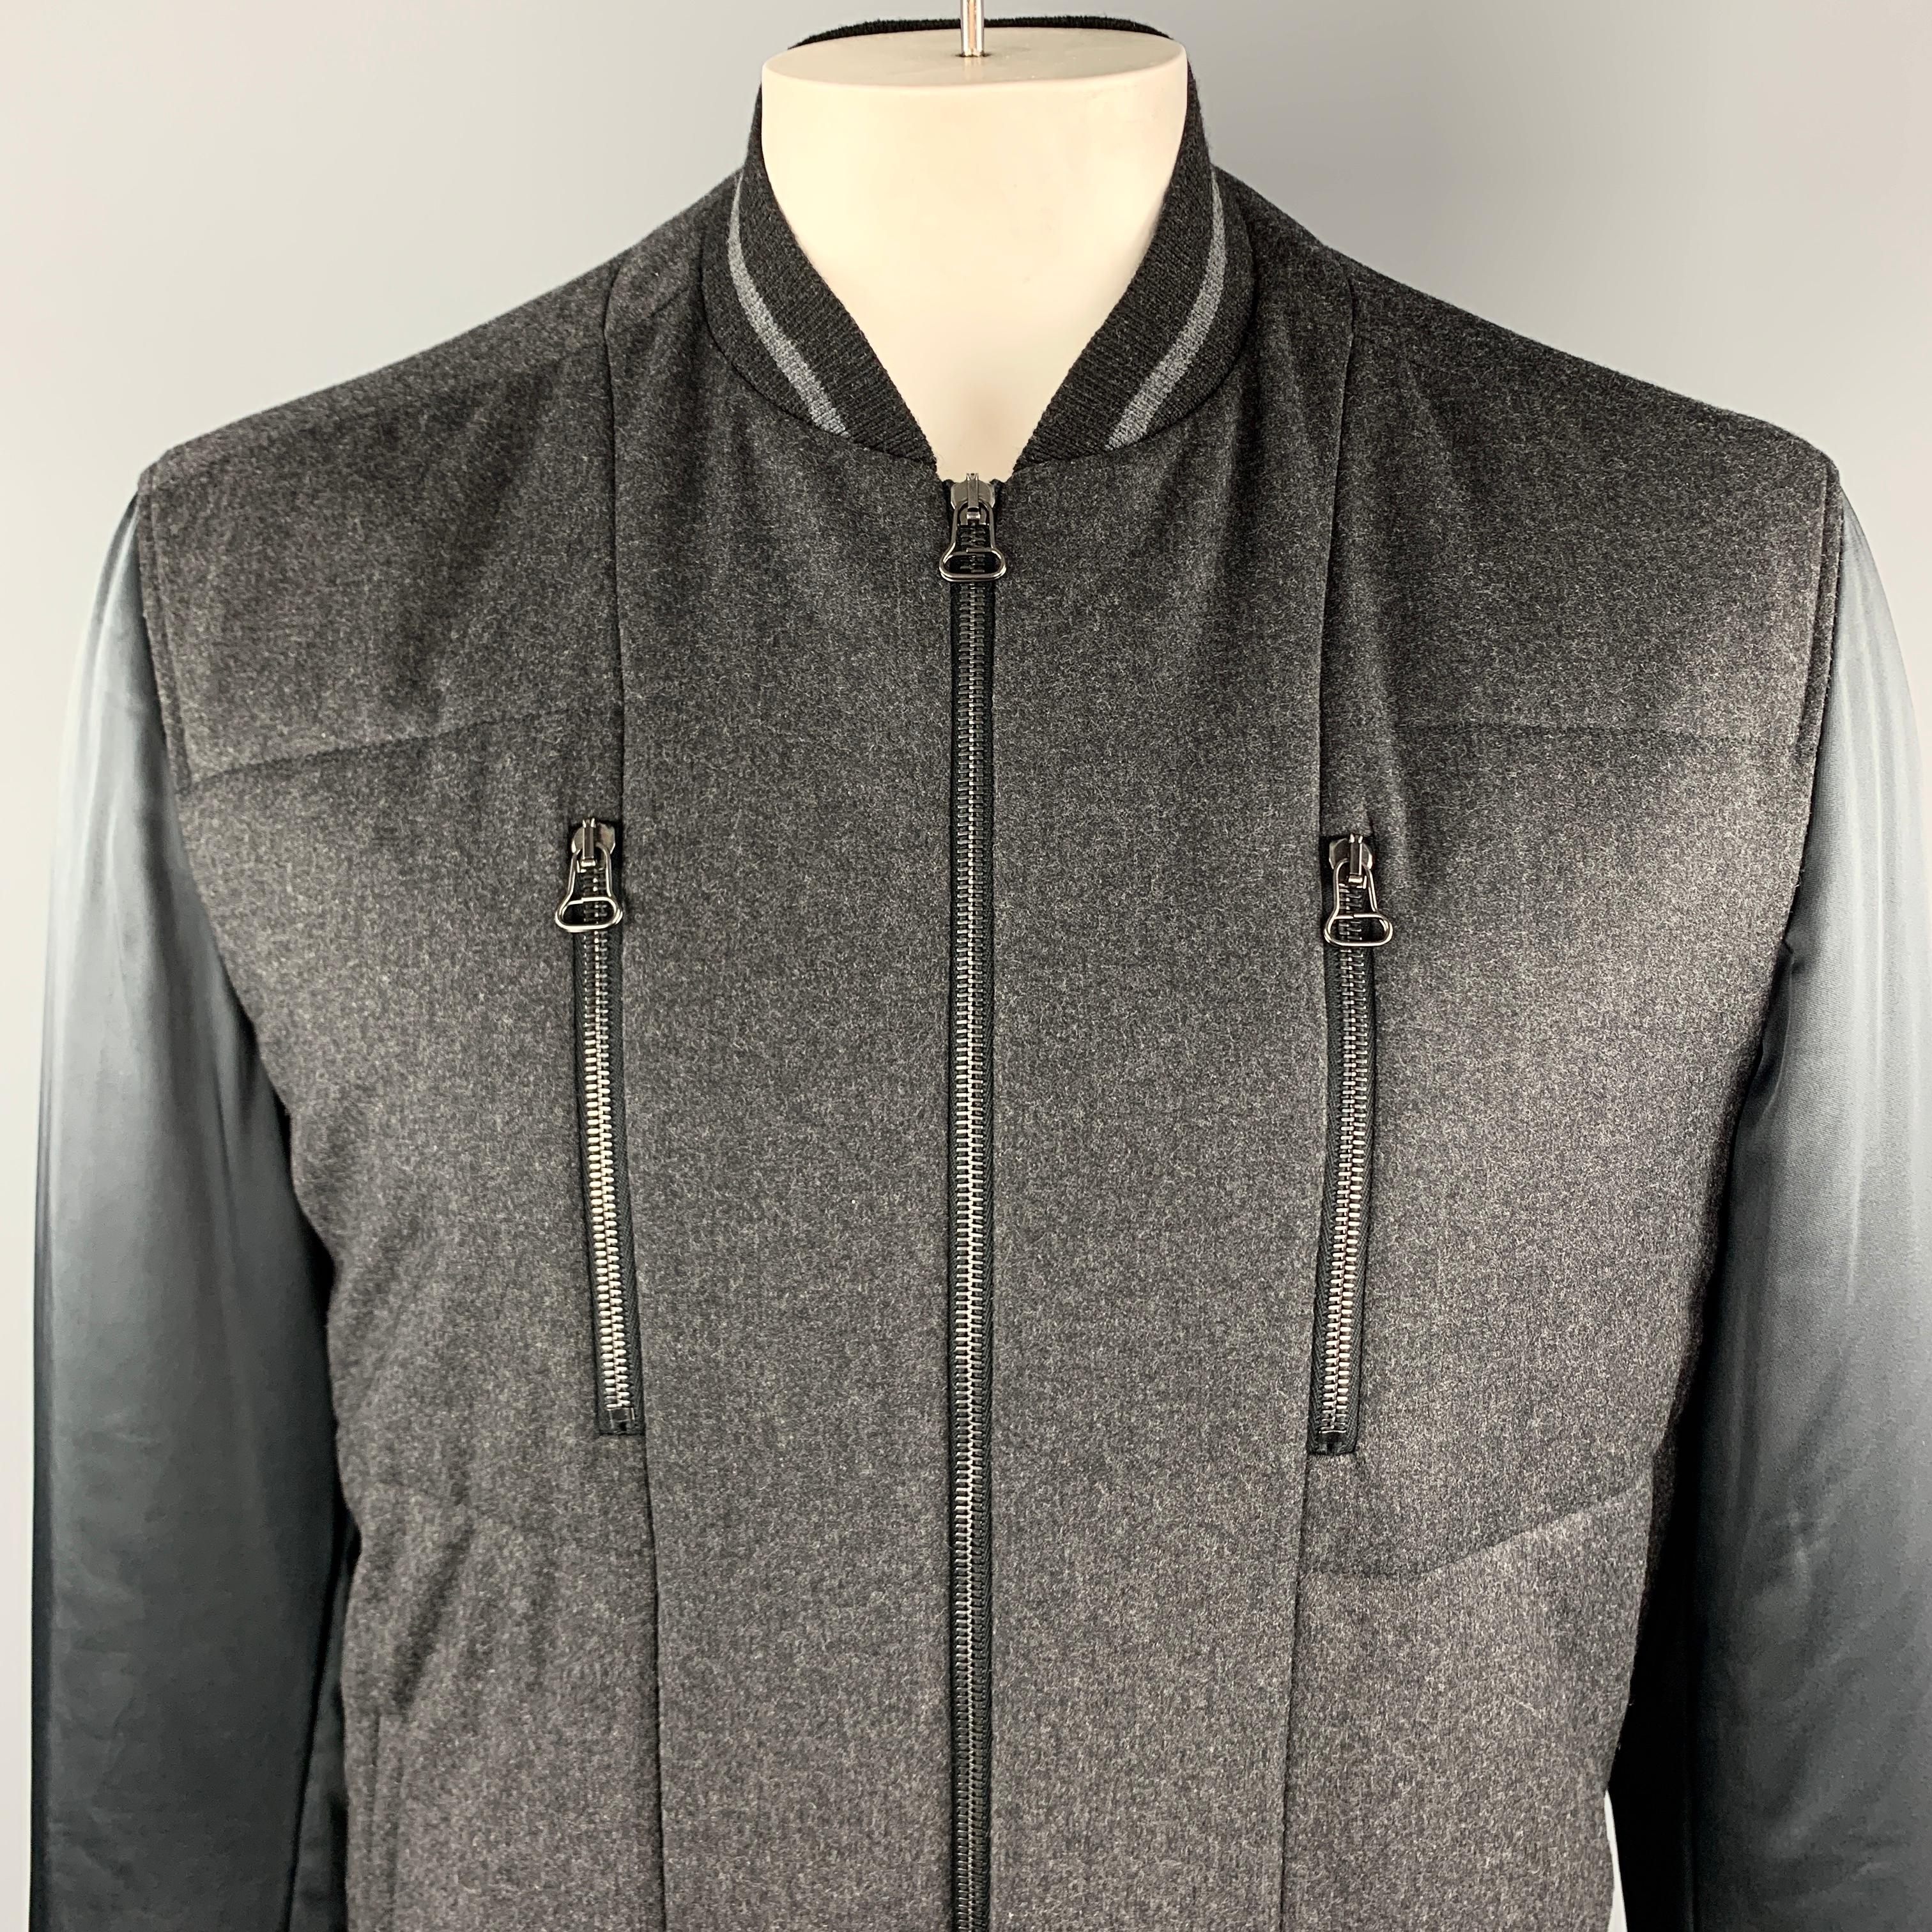 LANVIN Jacket comes in a charcoal wool / cashmere materials, with a contrast trim at collar, cuffs and hem, olive sleeves, a quilted front, zip and snap pockets, zip up. Made in Romania. 

Excellent Pre-Owned Condition.
Marked: EU